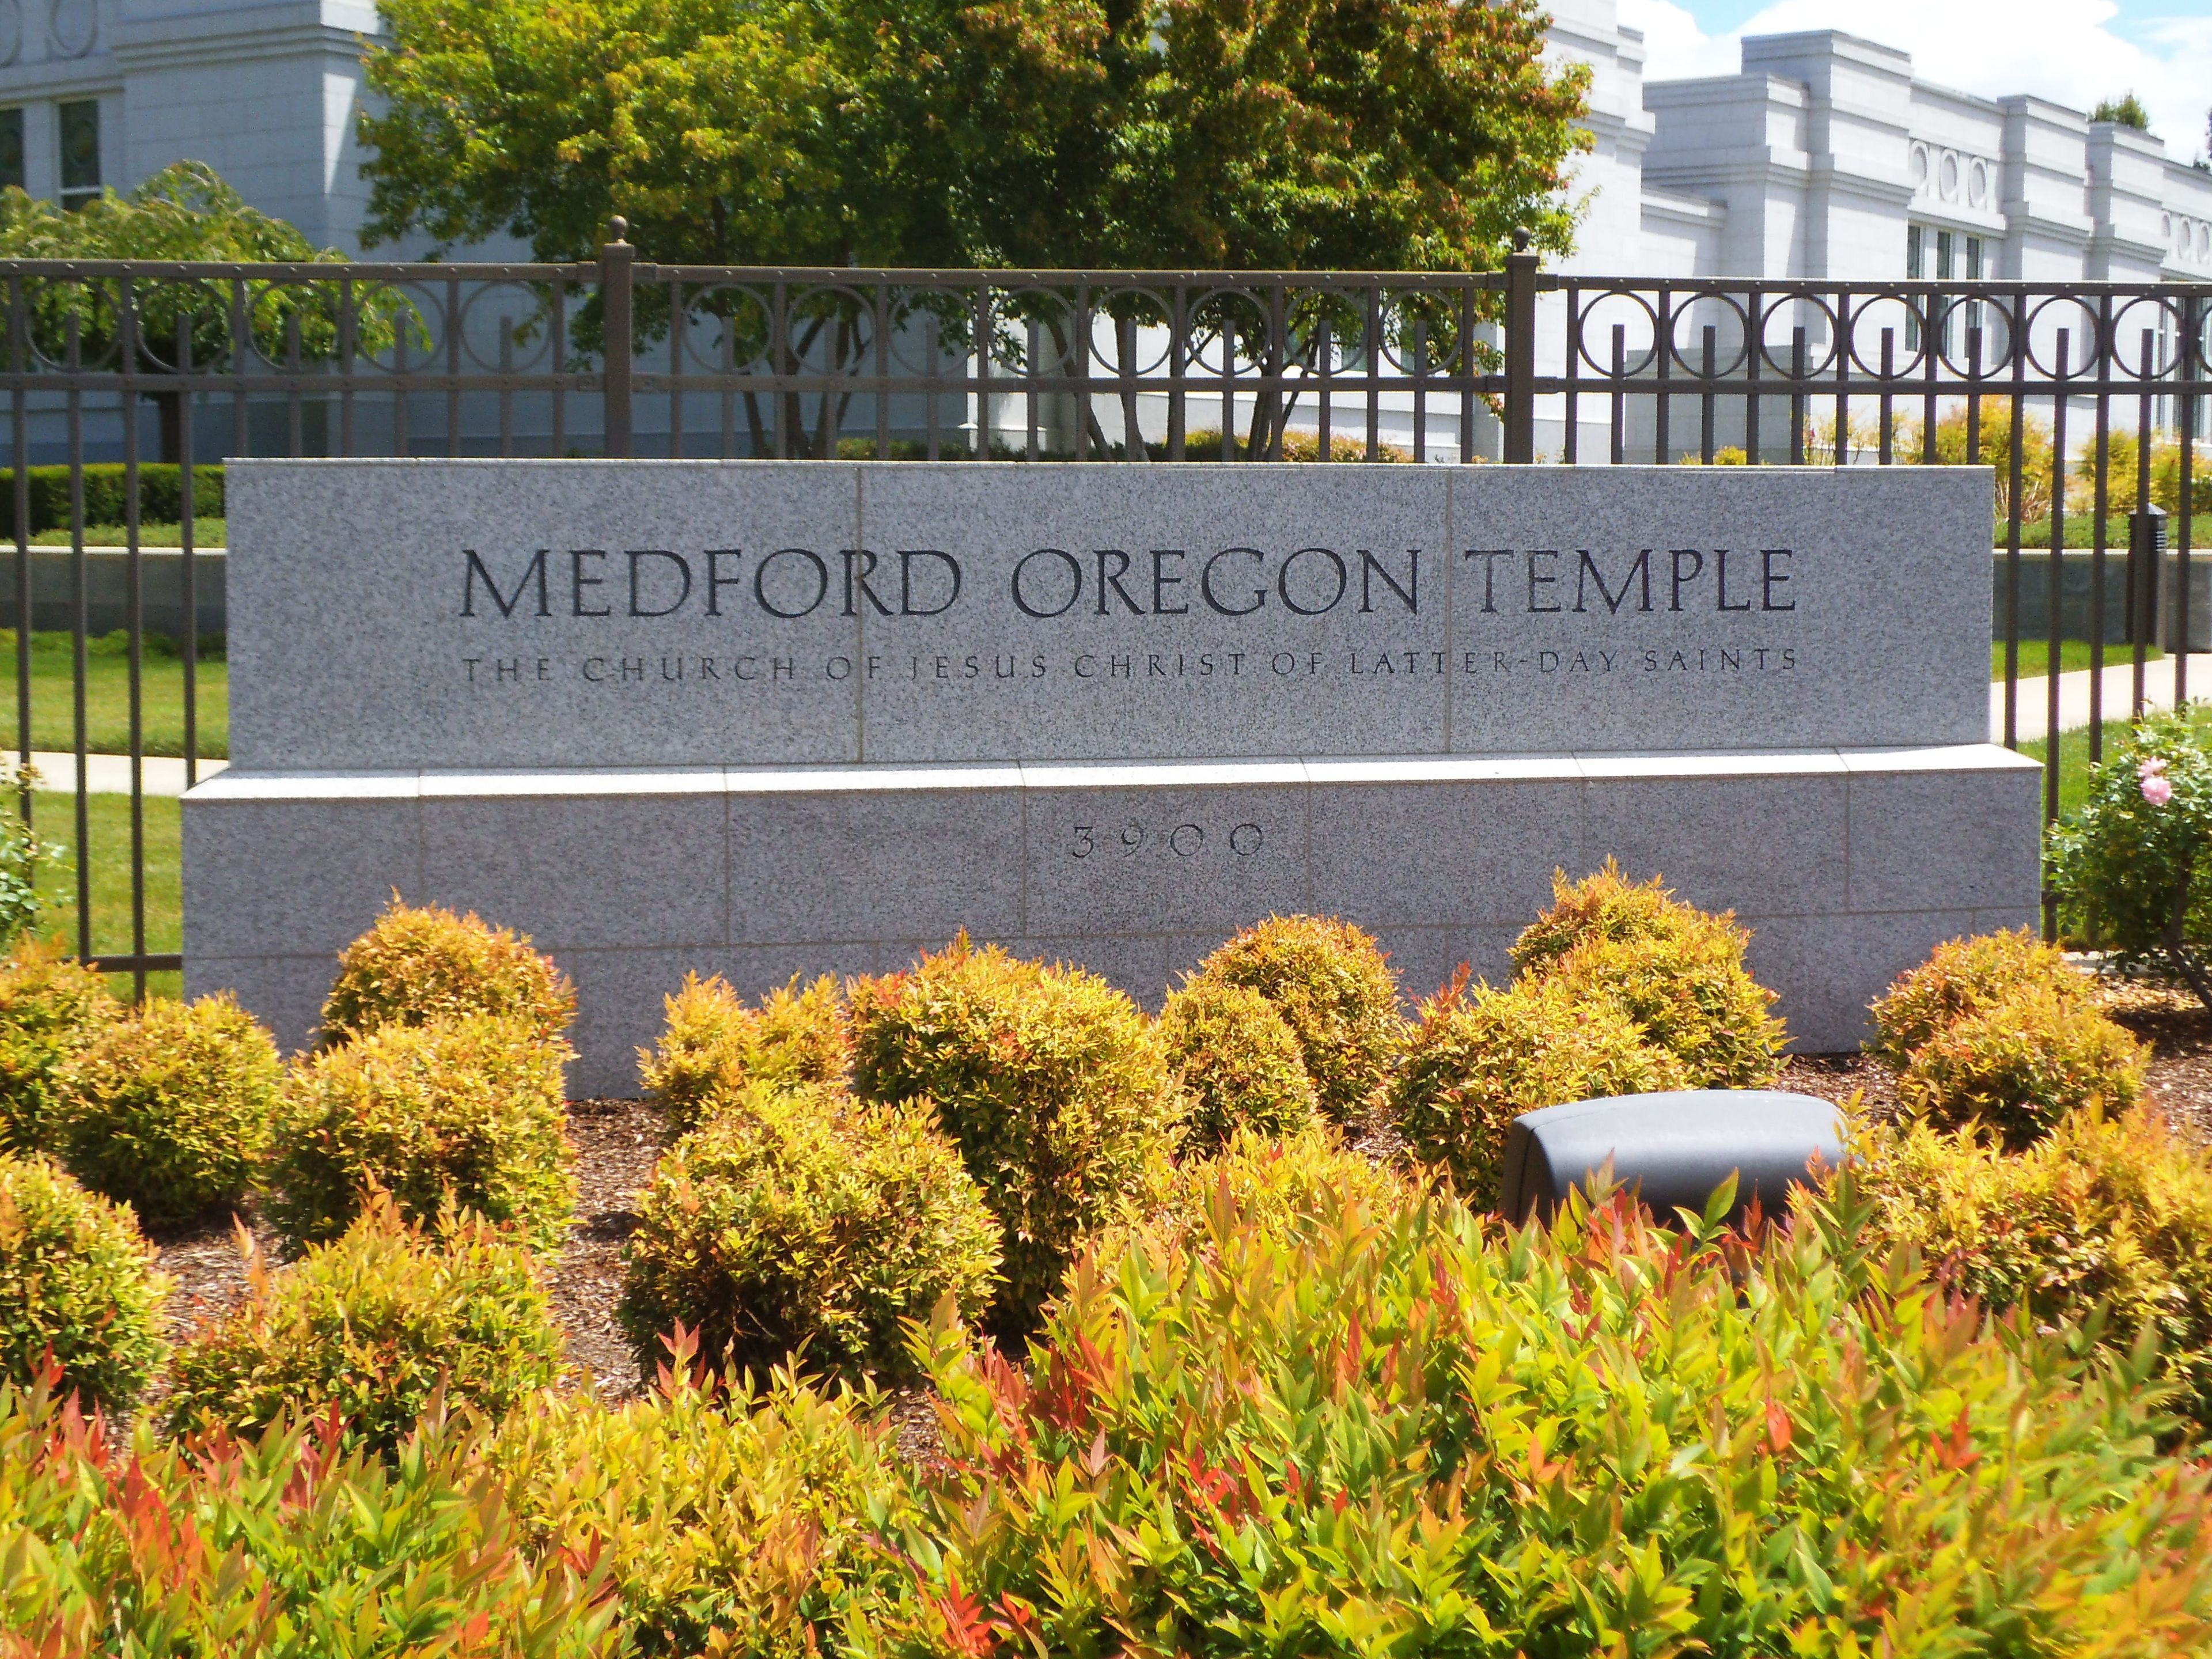 The Medford Oregon Temple name sign, including scenery.